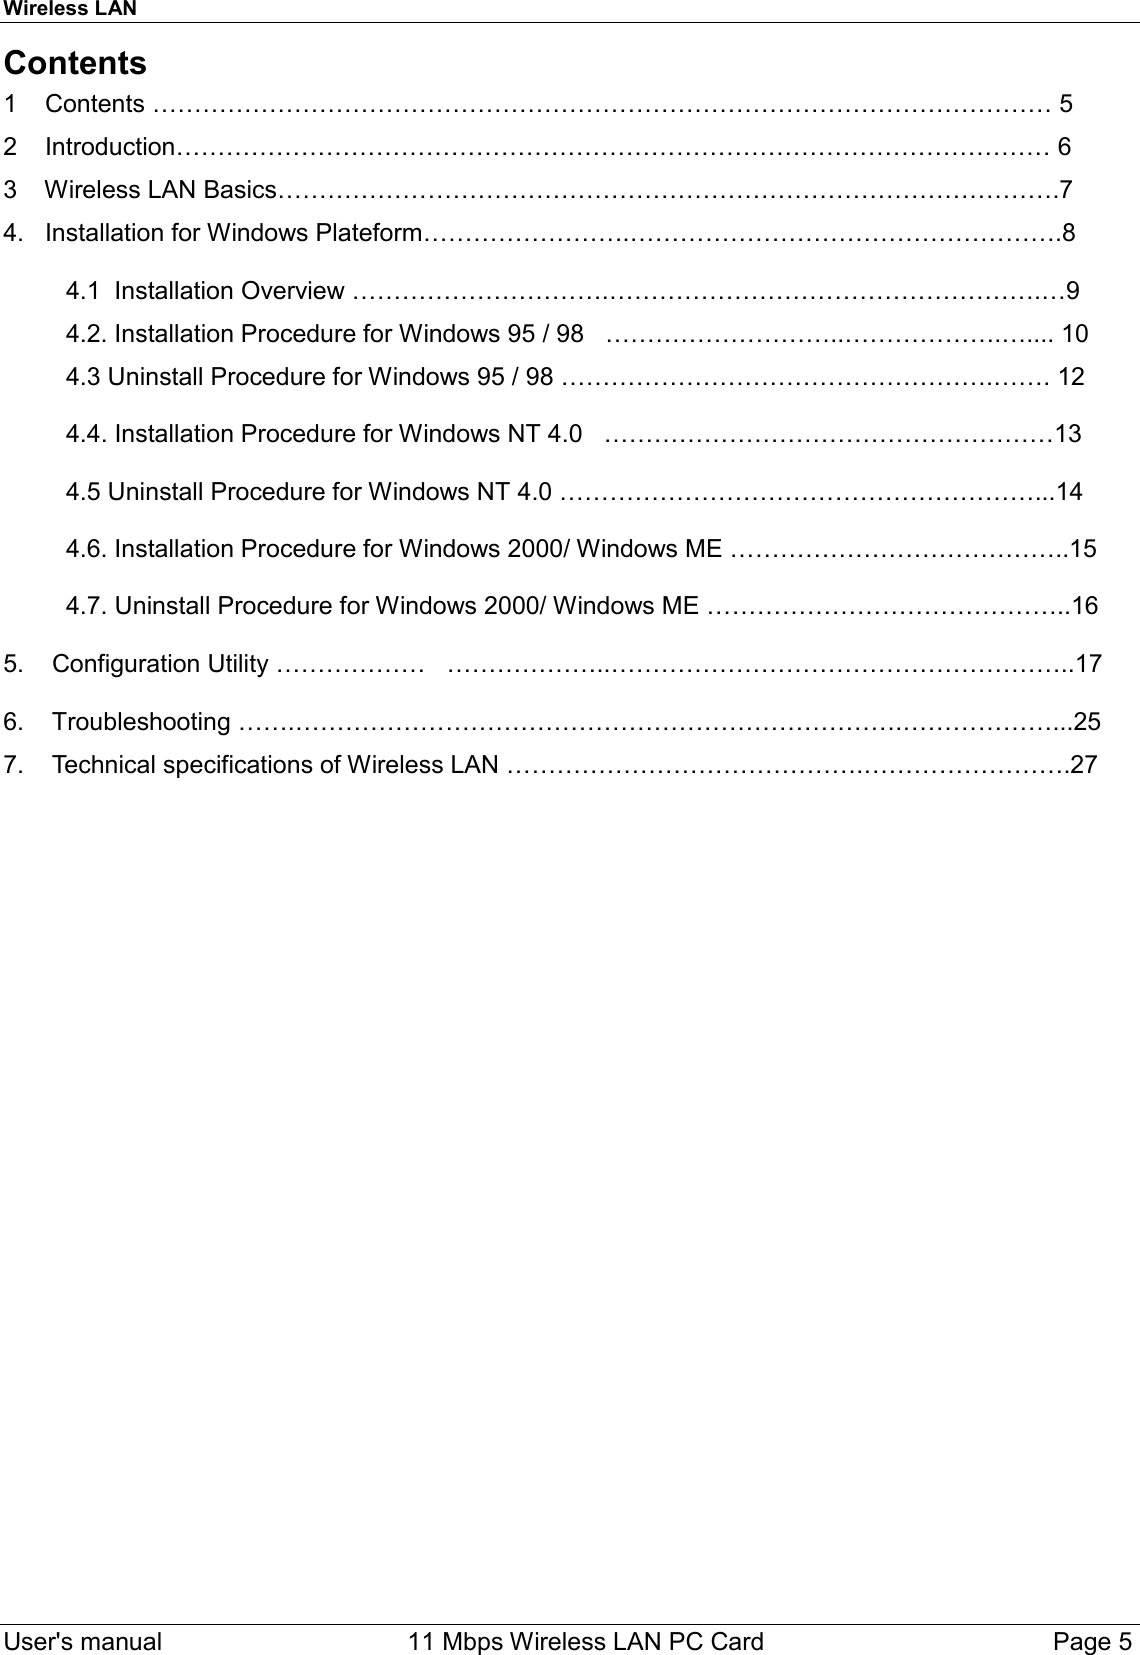 Wireless LAN  User&apos;s manual    11 Mbps Wireless LAN PC Card Page 5Contents1    Contents ……………………………………………………………………………………………… 52    Introduction…………………………………………………………………………………………… 63    Wireless LAN Basics………………………………………………………………………………….74.   Installation for Windows Plateform…………………….…………………………………………….8         4.1  Installation Overview ………………………….…………………………………………….…9         4.2. Installation Procedure for Windows 95 / 98   ………………………..……………….….... 10         4.3 Uninstall Procedure for Windows 95 / 98 …………………………………………….……. 12         4.4. Installation Procedure for Windows NT 4.0   ………………………………………………13         4.5 Uninstall Procedure for Windows NT 4.0 …………………………………………………...14         4.6. Installation Procedure for Windows 2000/ Windows ME …………………………………..15         4.7. Uninstall Procedure for Windows 2000/ Windows ME ……………………………………..165.    Configuration Utility ………………   ………………..………………………………………………..176.    Troubleshooting …….……………………………………………………………….………………...257.    Technical specifications of Wireless LAN …………………………………….…………………….27